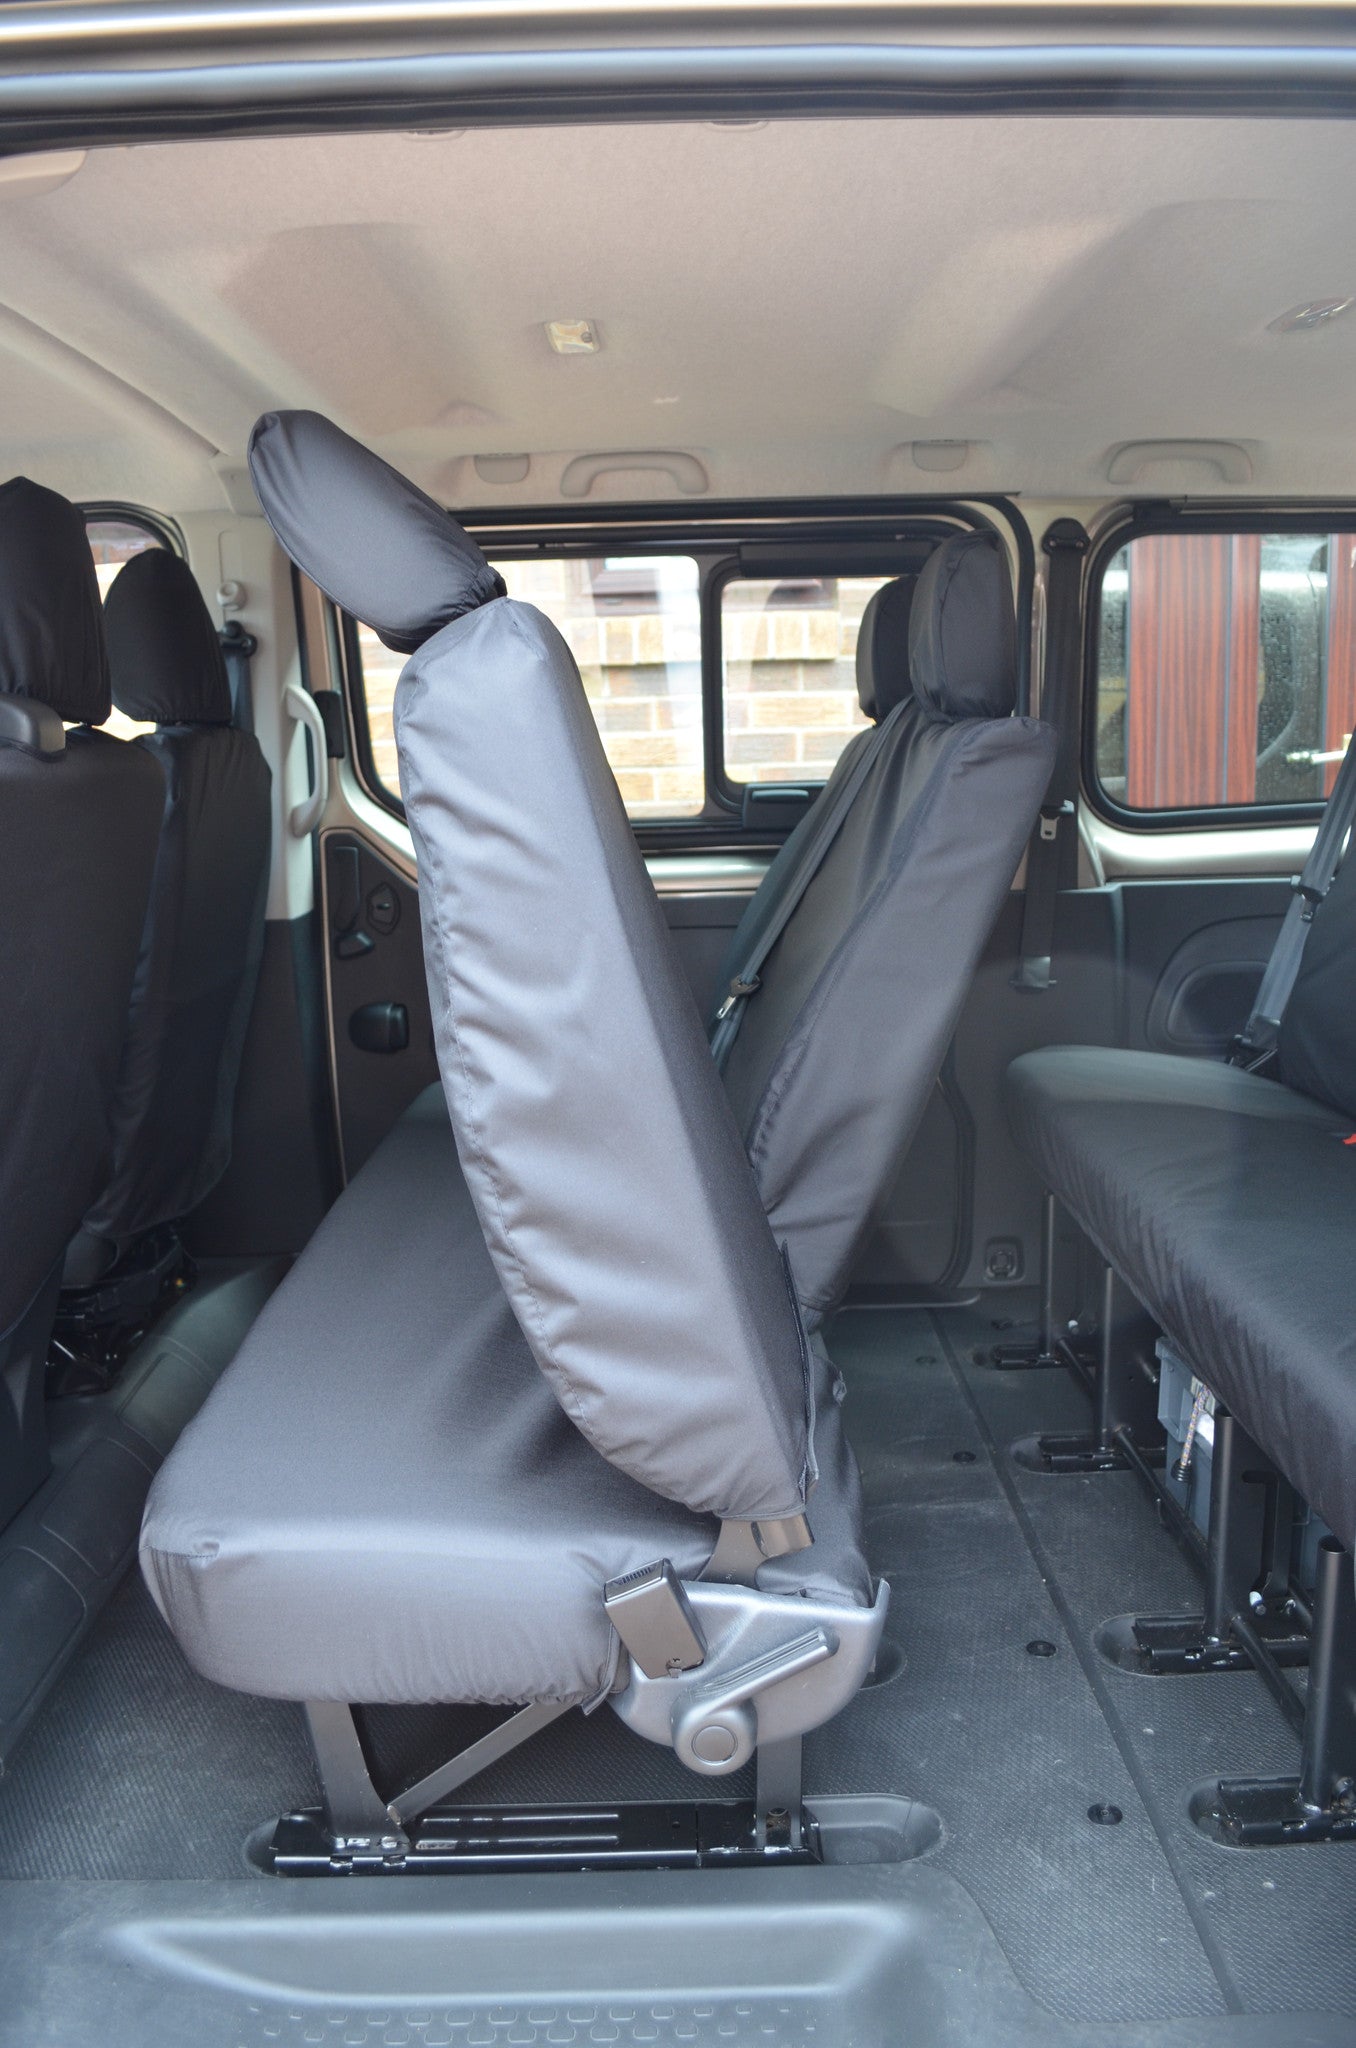 Renault Trafic Passenger 2001 - 2006 Seat Covers Black / 2nd Row Rear Turtle Covers Ltd